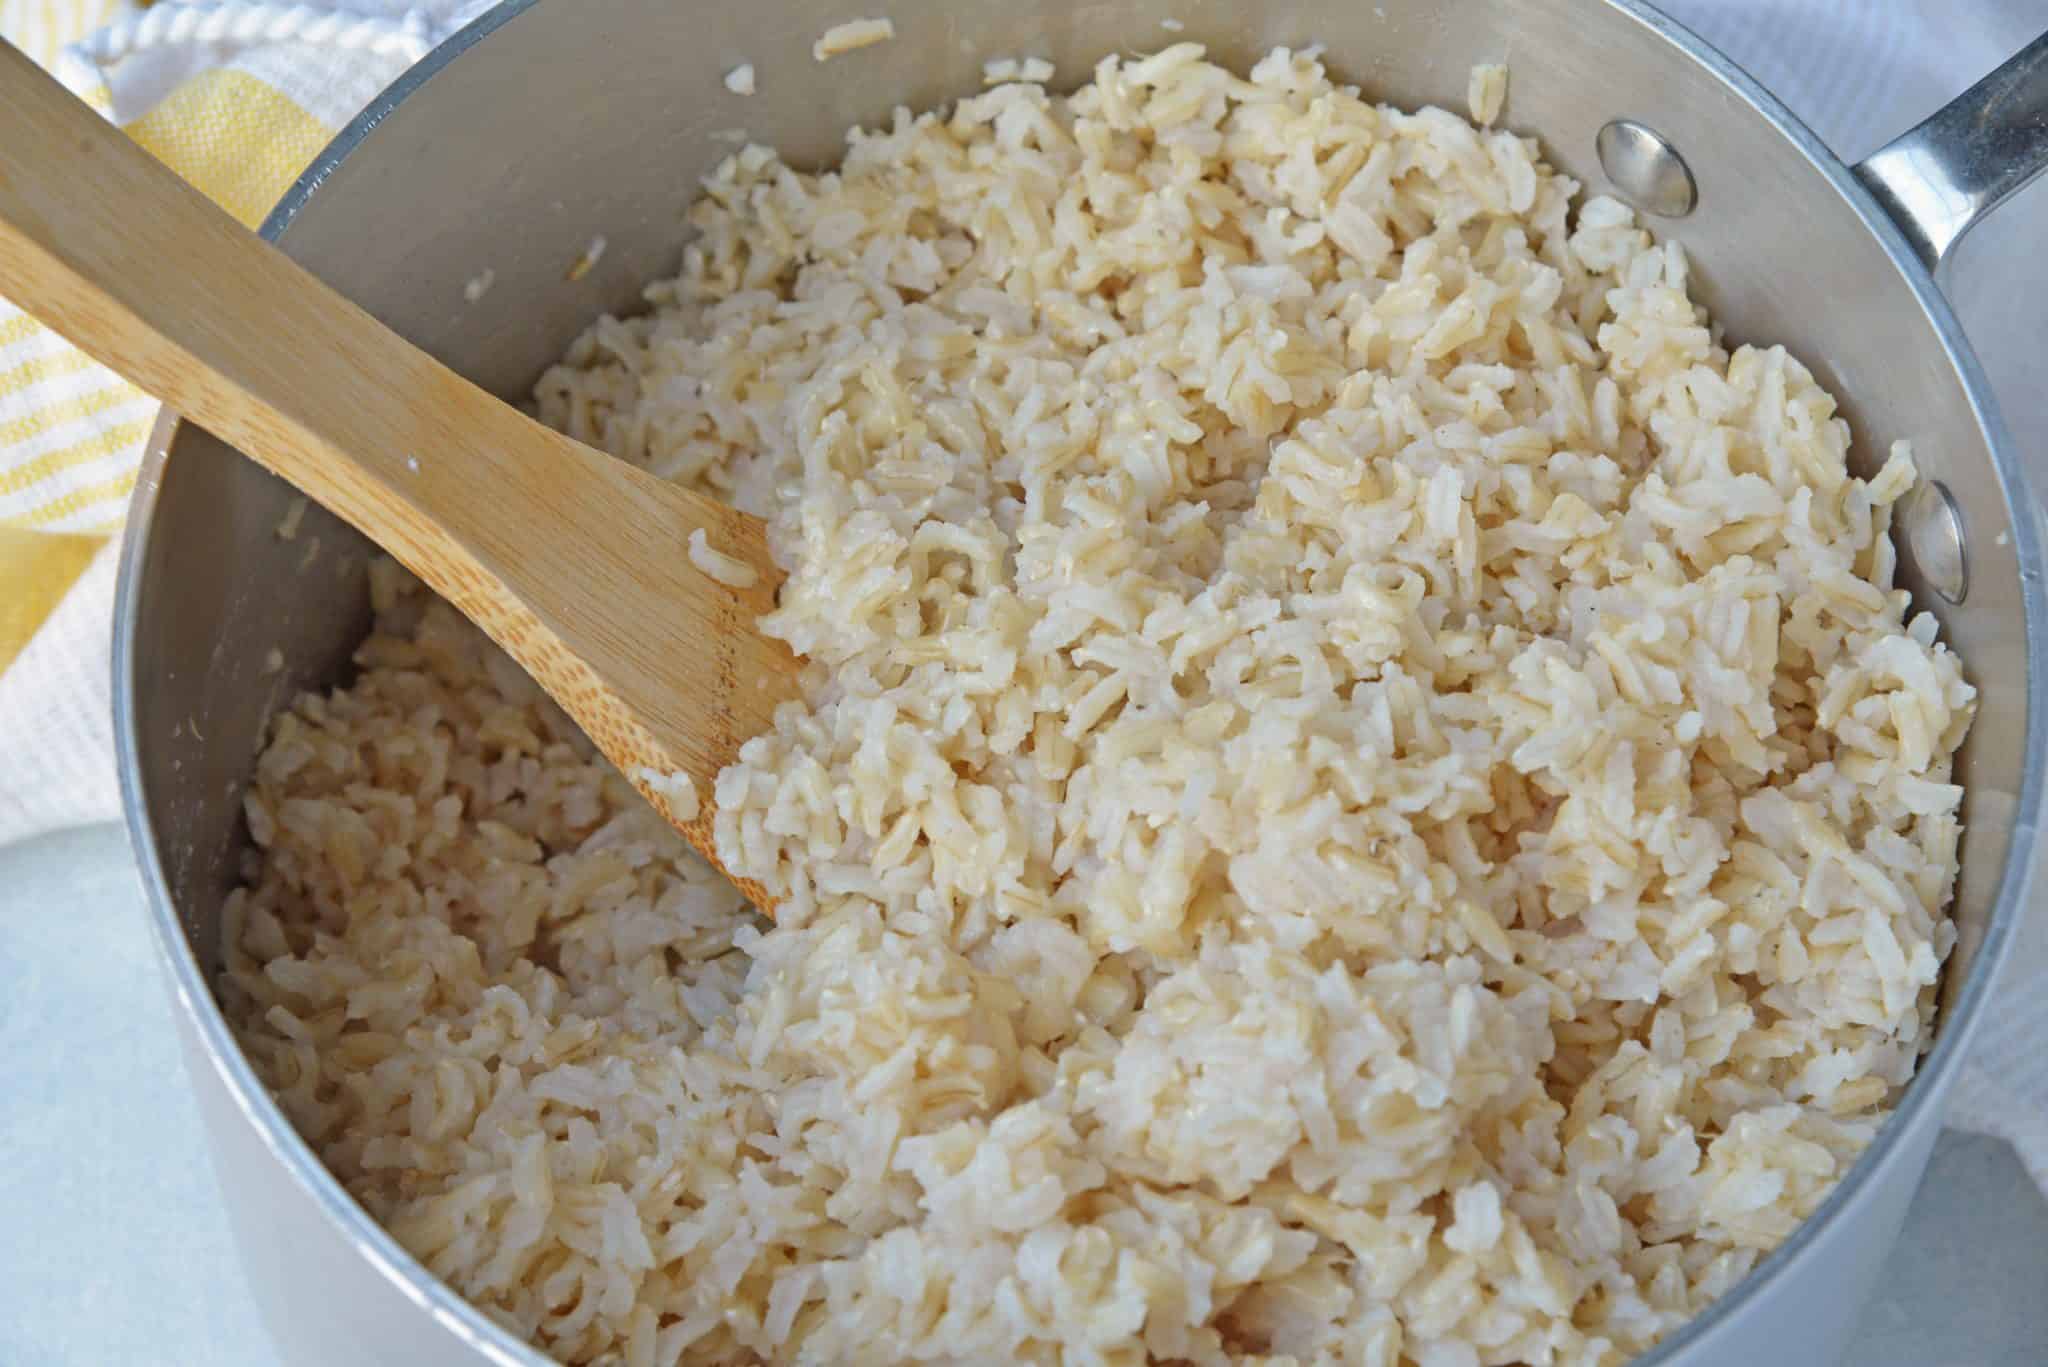 Ginger Rice is an easy and delicious jasmine rice recipe that's full of flavor. Great as a standalone side or as part of another Asian dish. #gingerrice #jasminericerecipes www.savoryexperiments.com